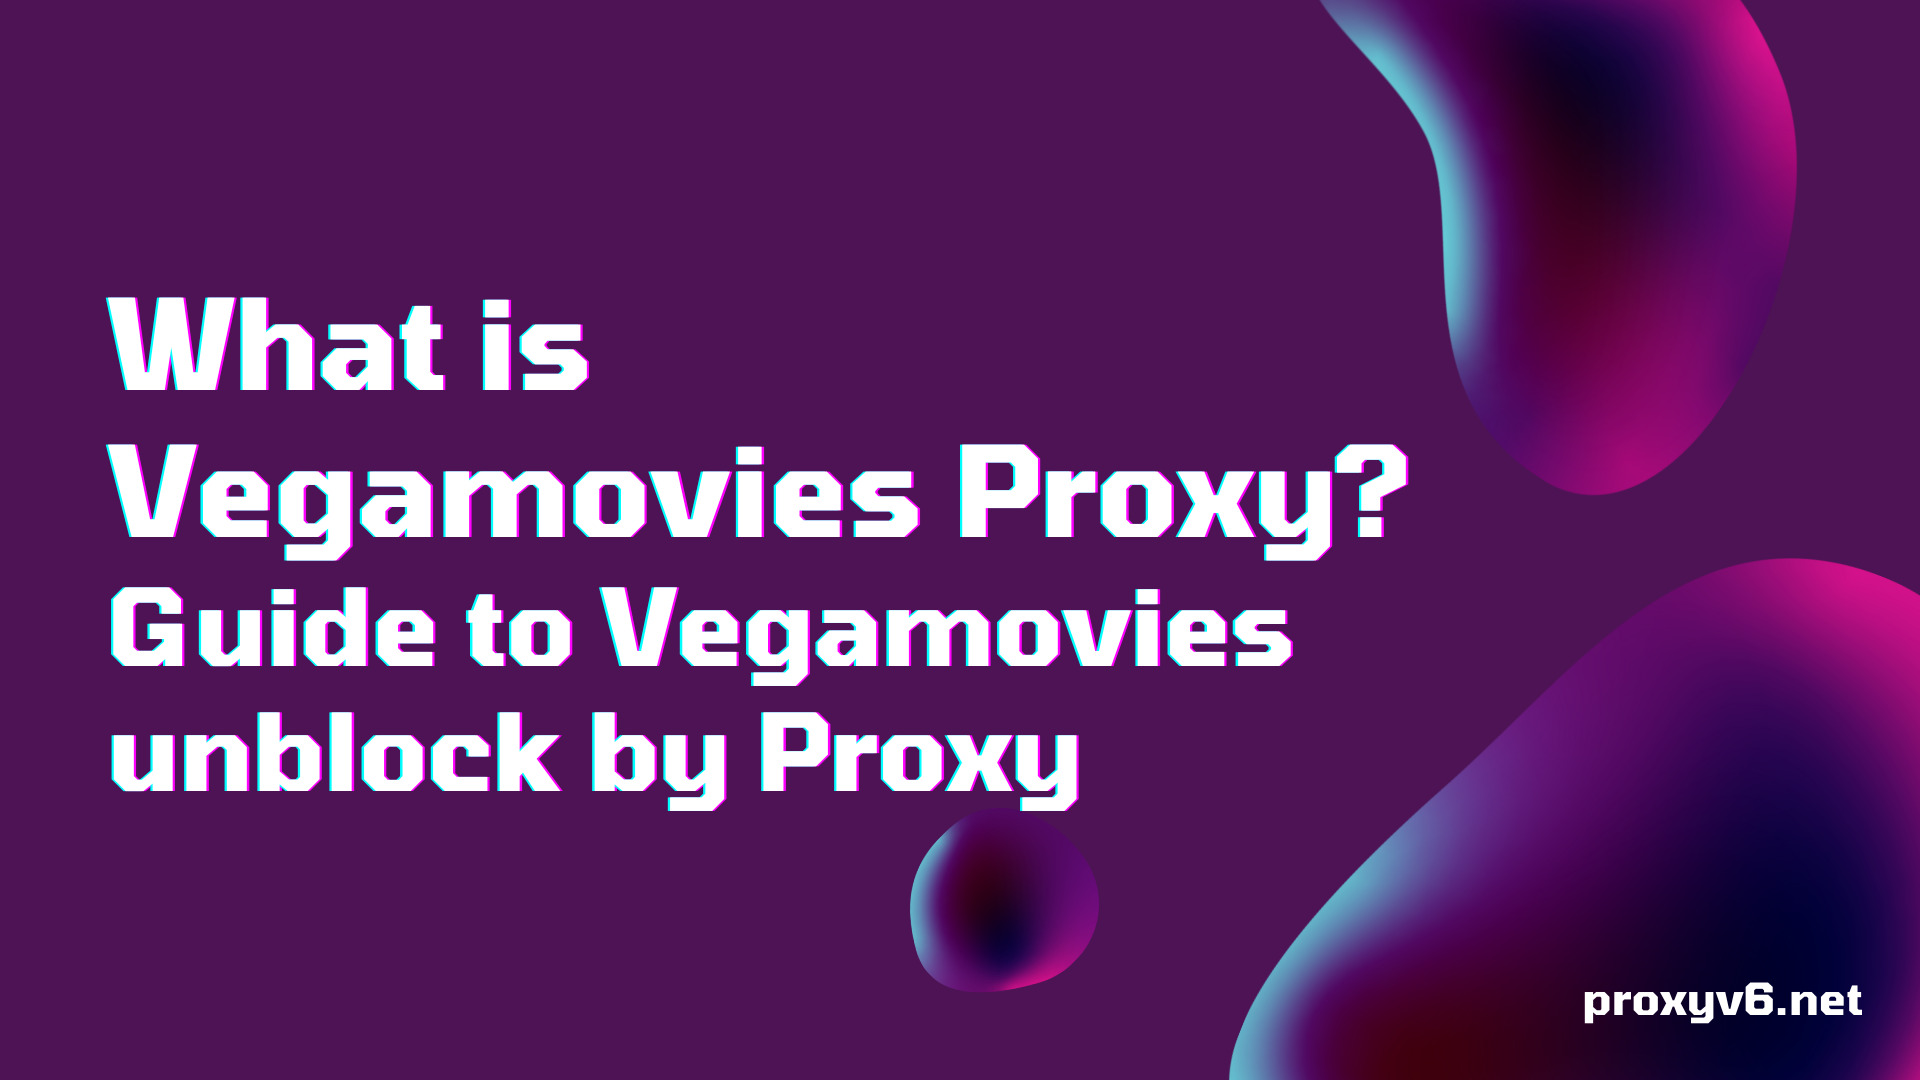 What is Vegamovies Proxy? Guide to Vegamovies unblock by Proxy